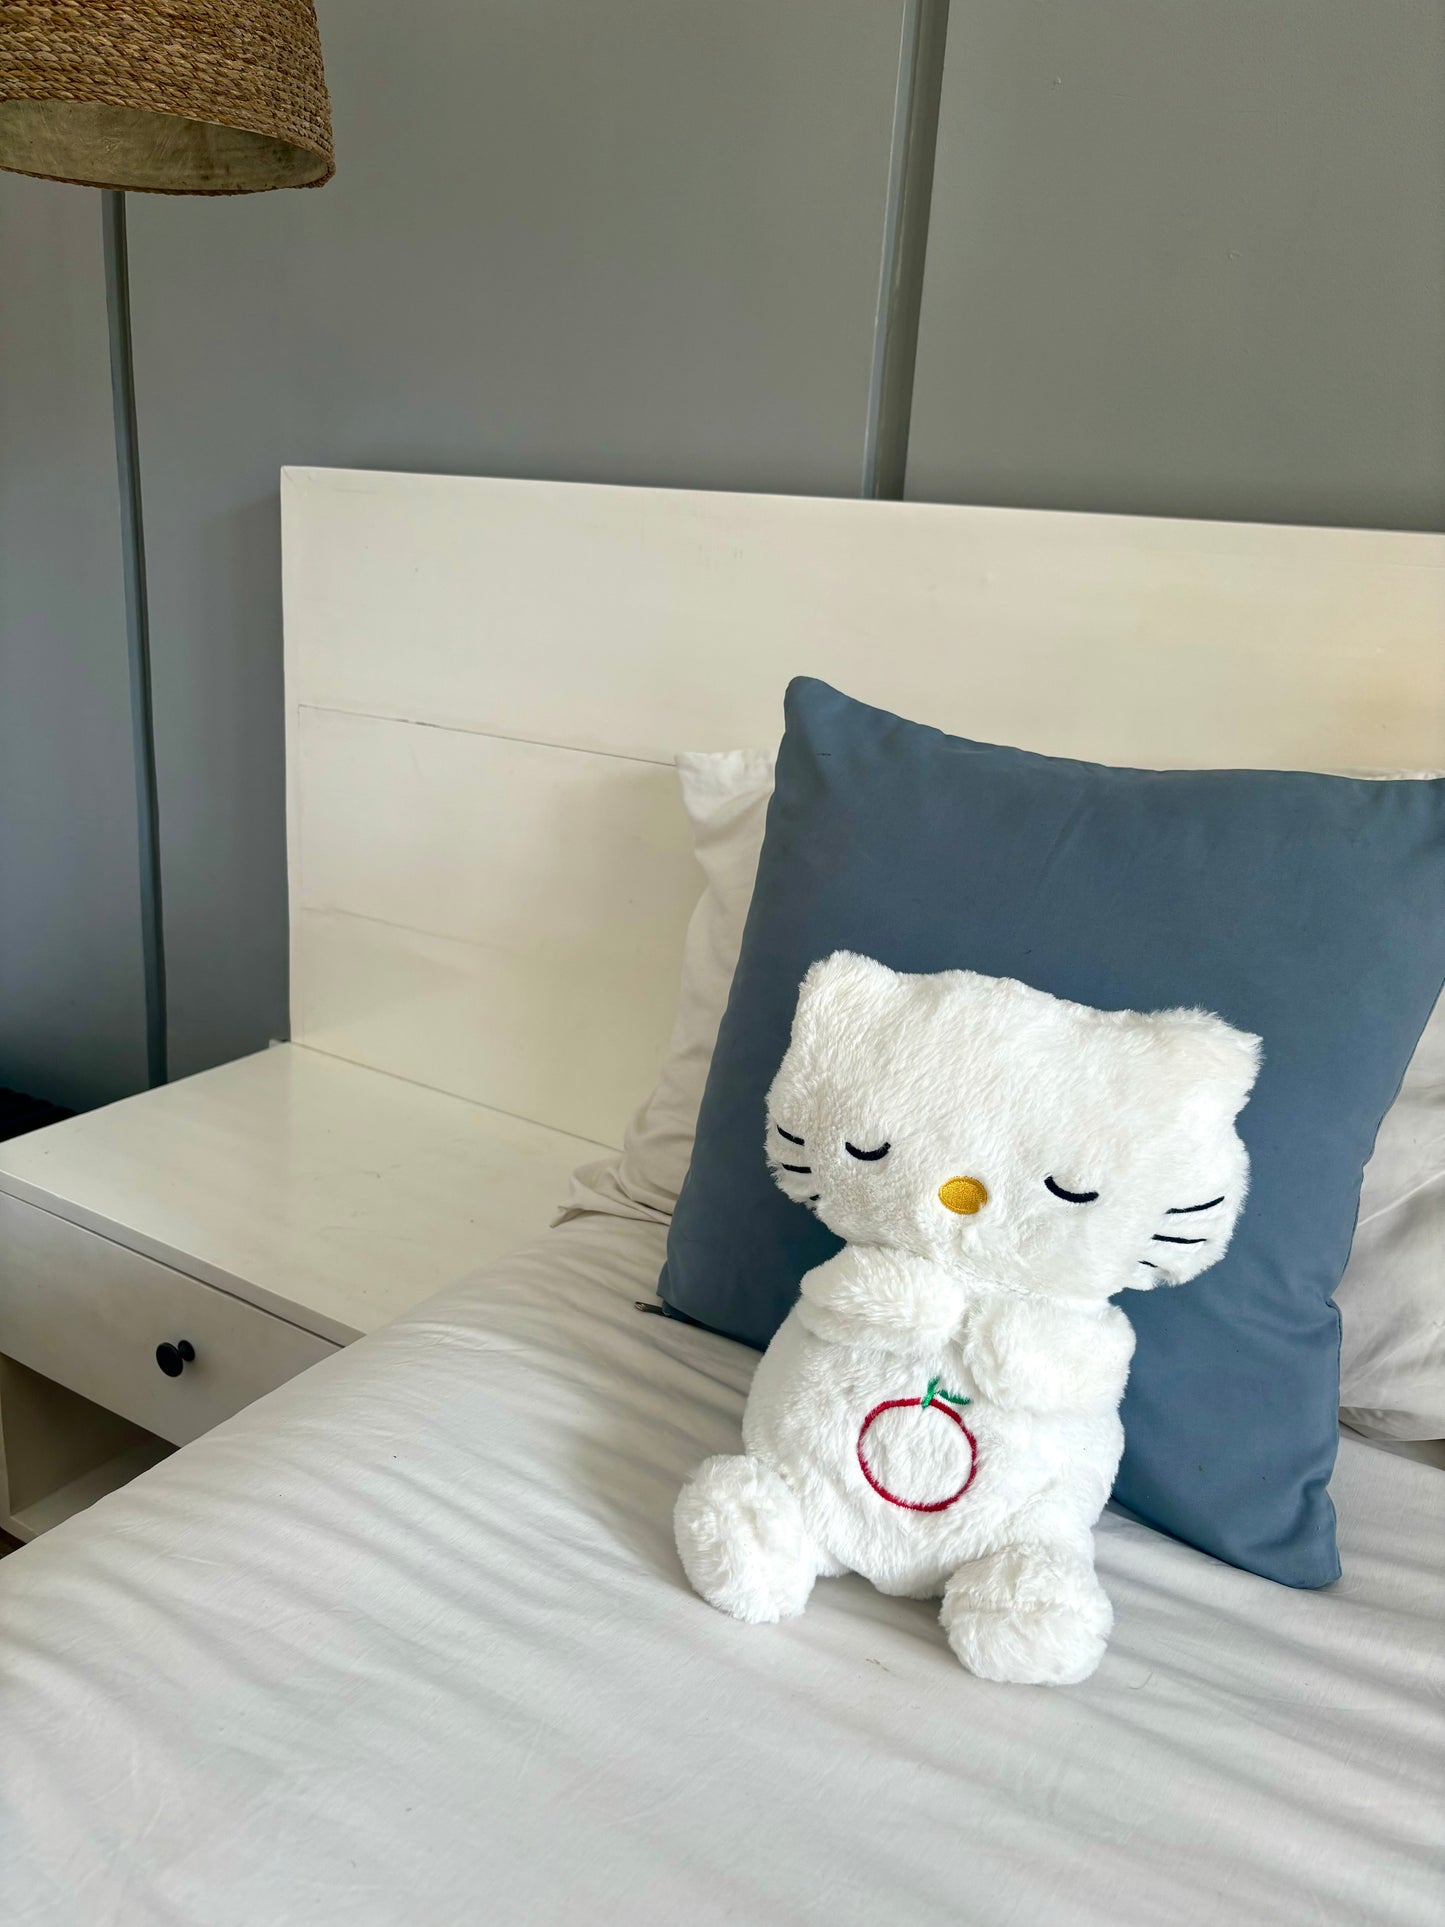 Breathing teddy that helps with anxiety and sleep